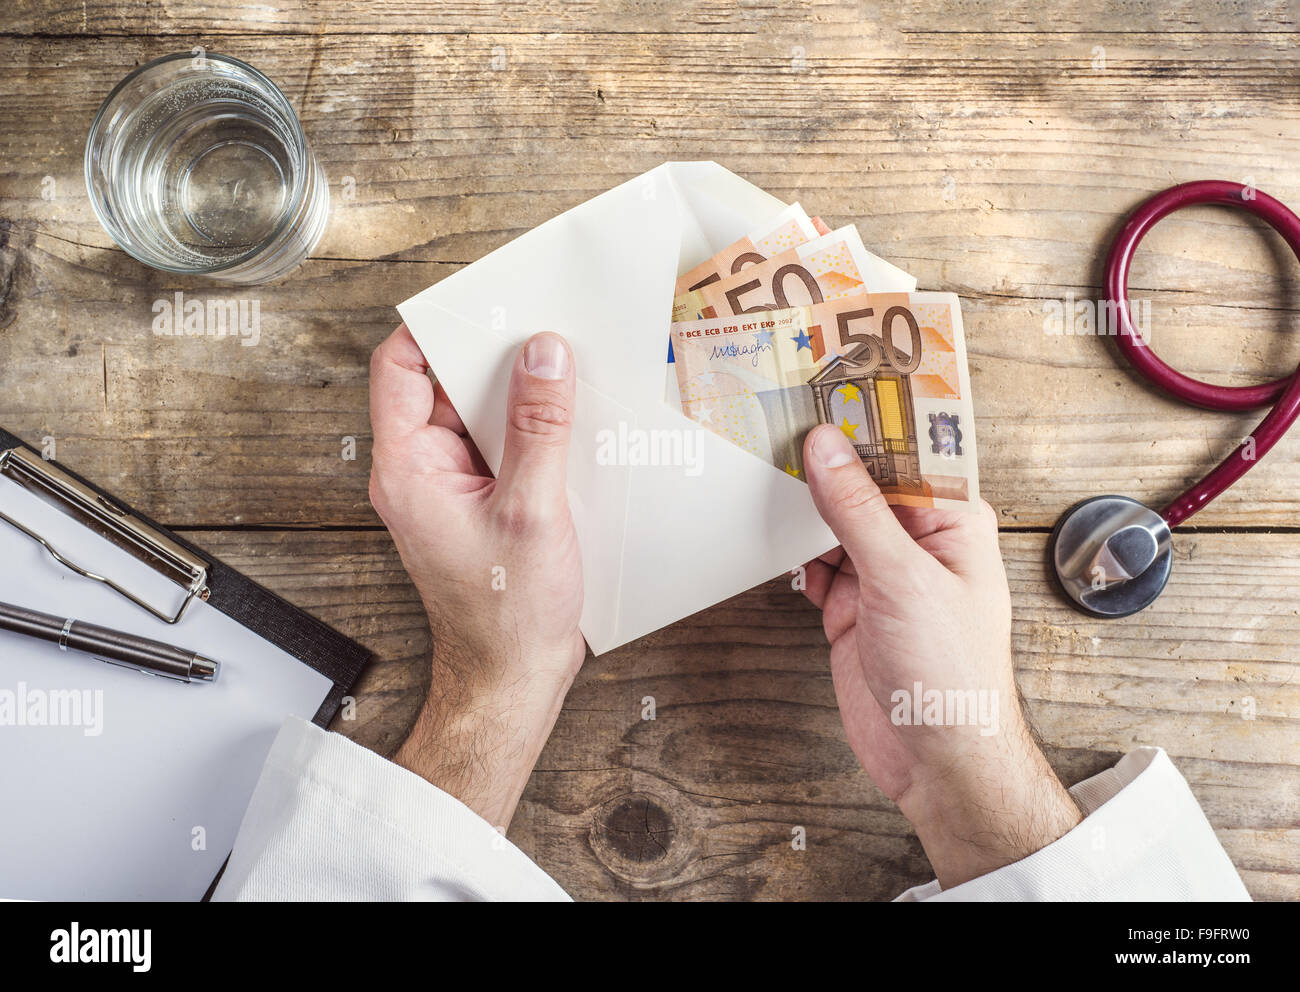 Hands of unrecognizable doctor accepting a bribe. Wooden desk background. Stock Photo